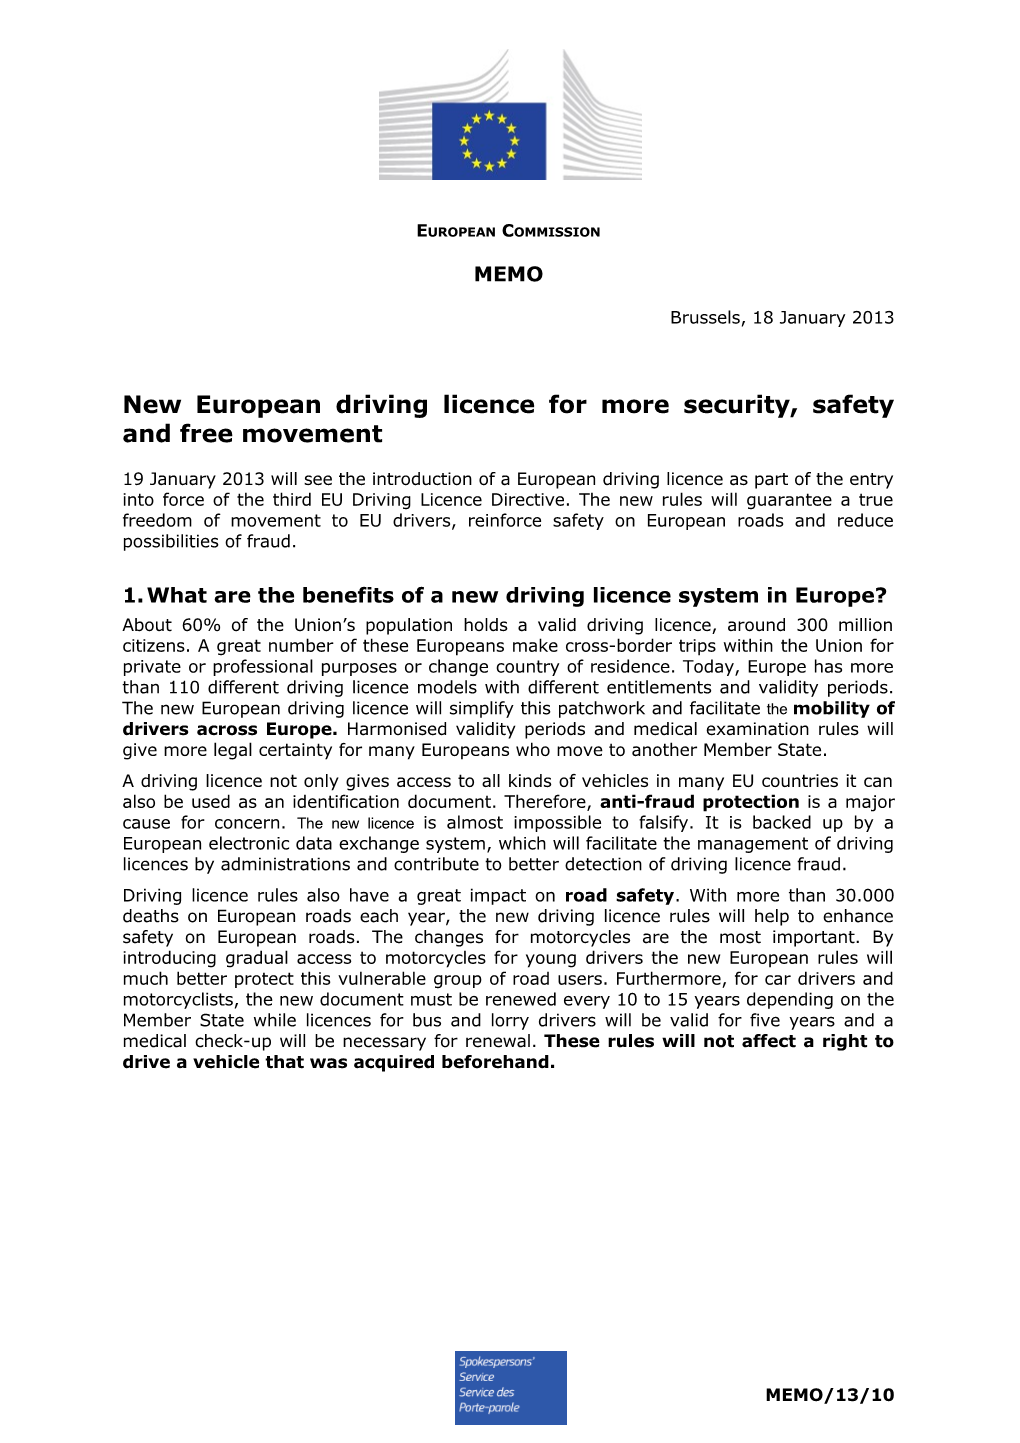 New European Driving Licence for More Security, Safety and Free Movement